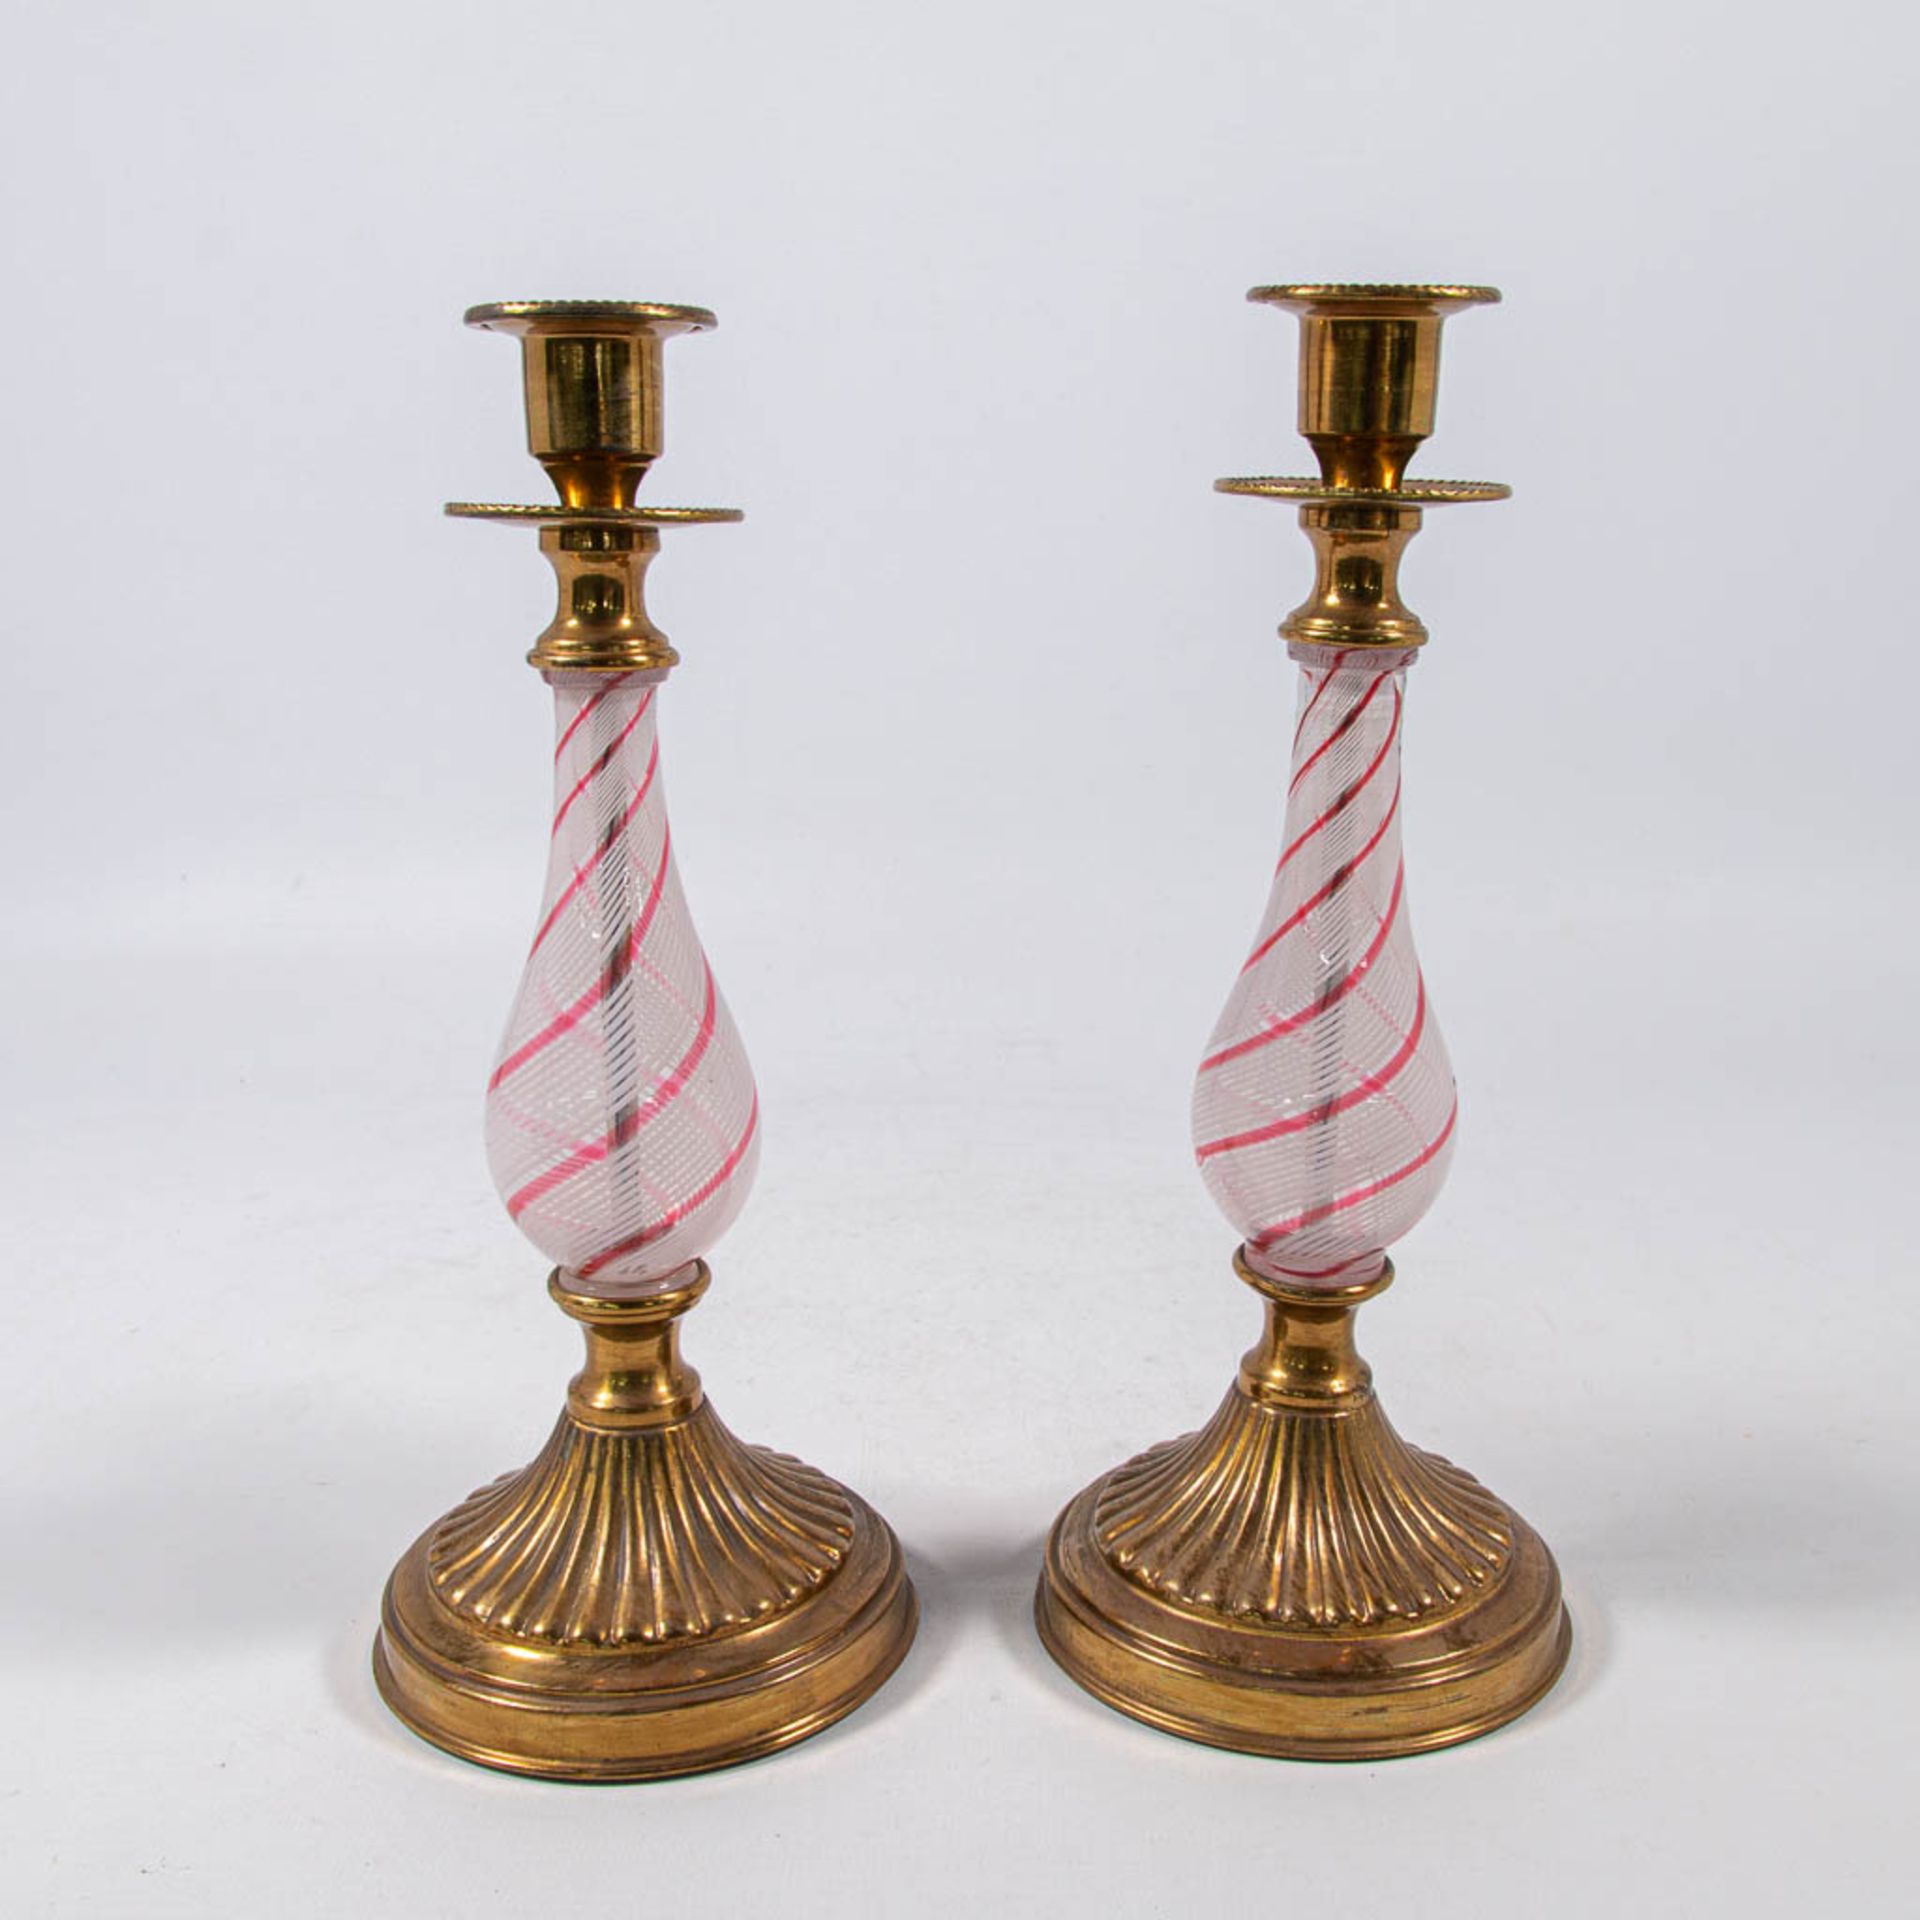 A pair of candlesticks, bronze mounted glass, made in Murano, Italy around 1920. (26 x 11 cm) - Image 3 of 12